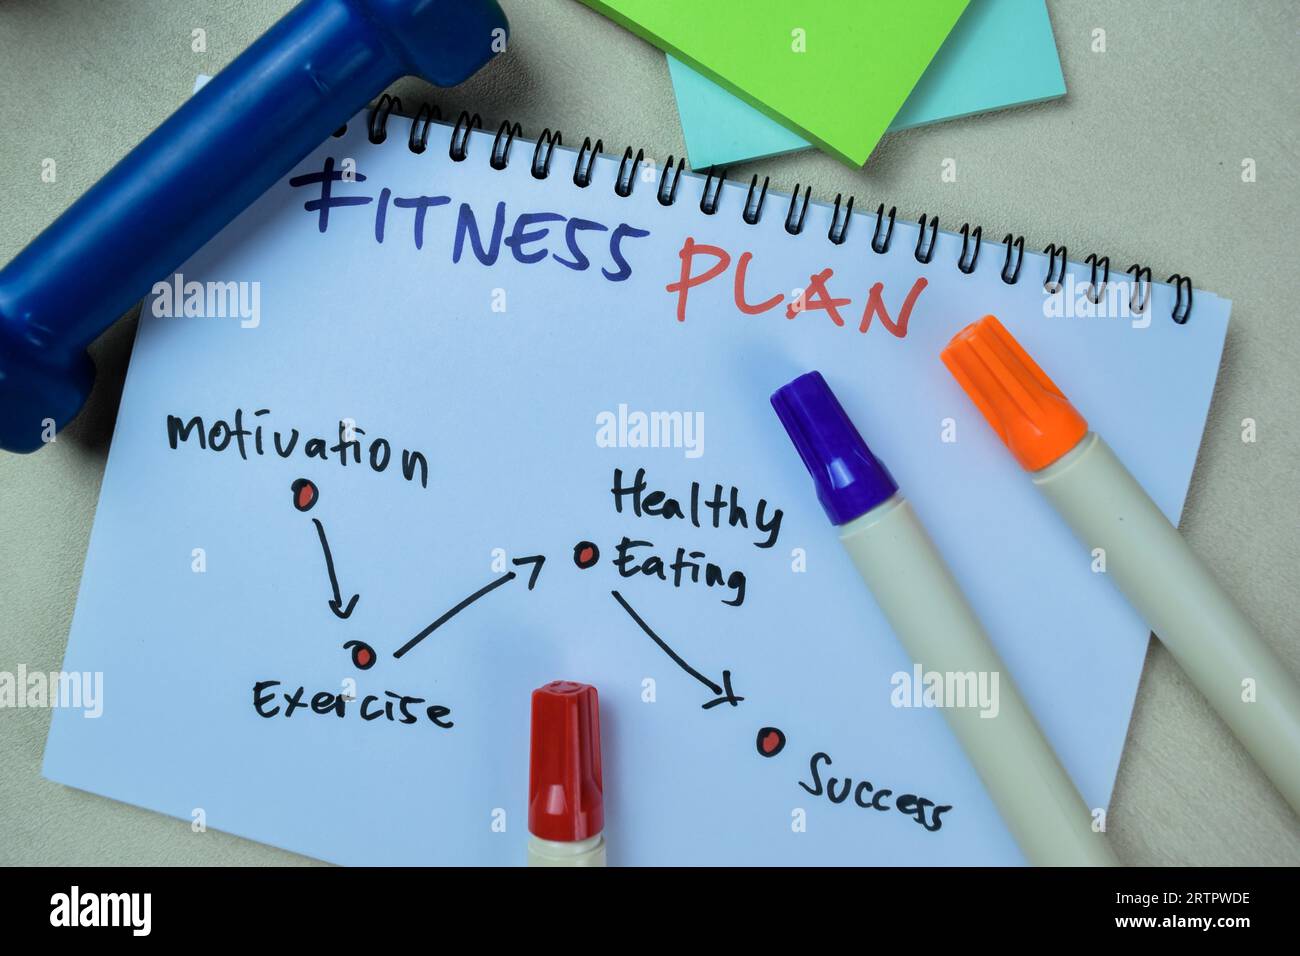 Concept of Fitness Plan write on book with keywords isolated on Wooden Table. Stock Photo